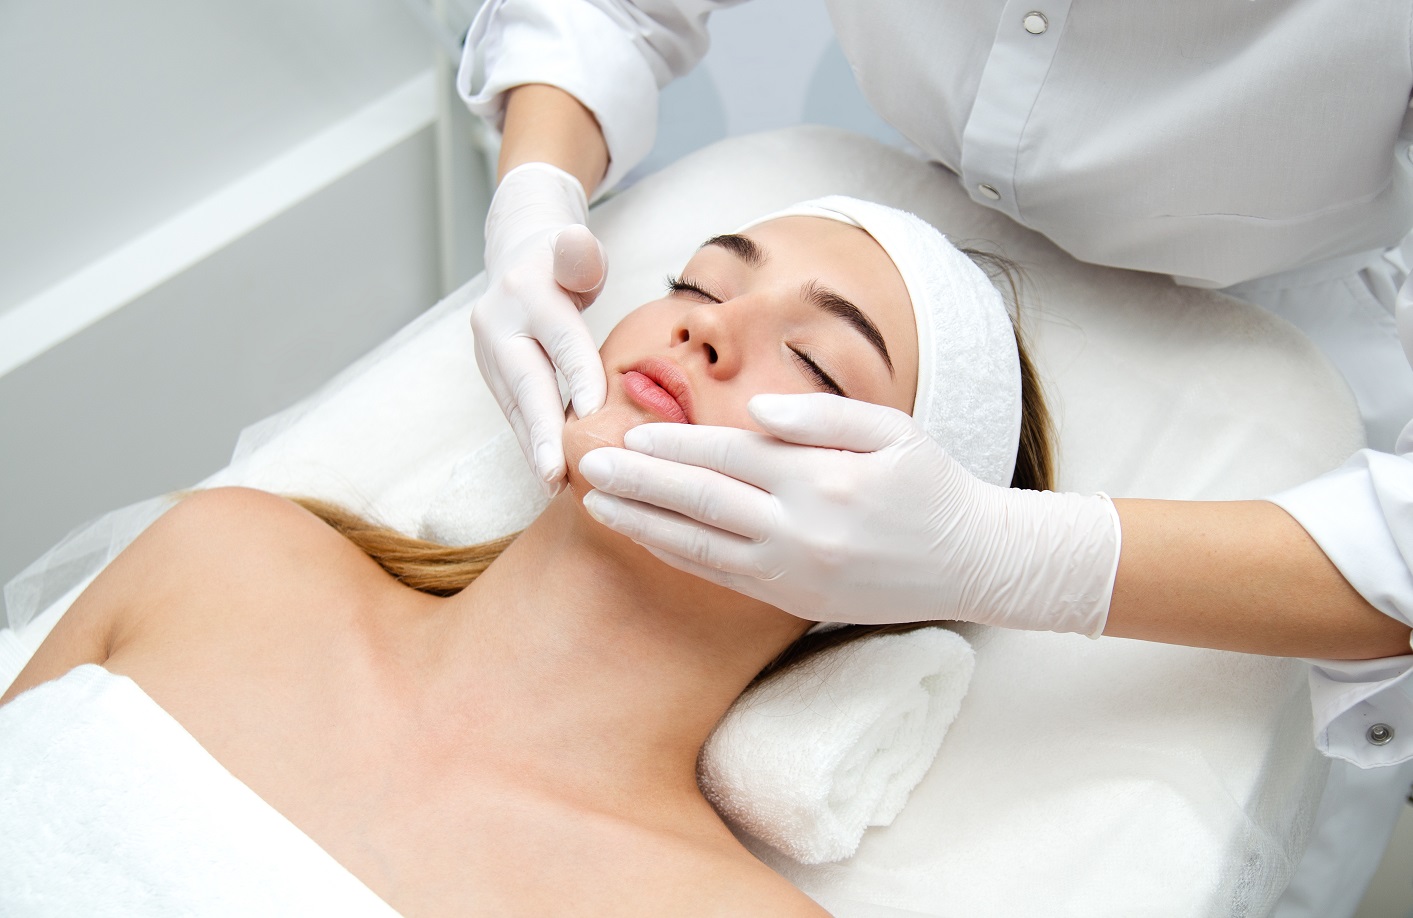 Woman getting face beauty treatment in medical spa center.